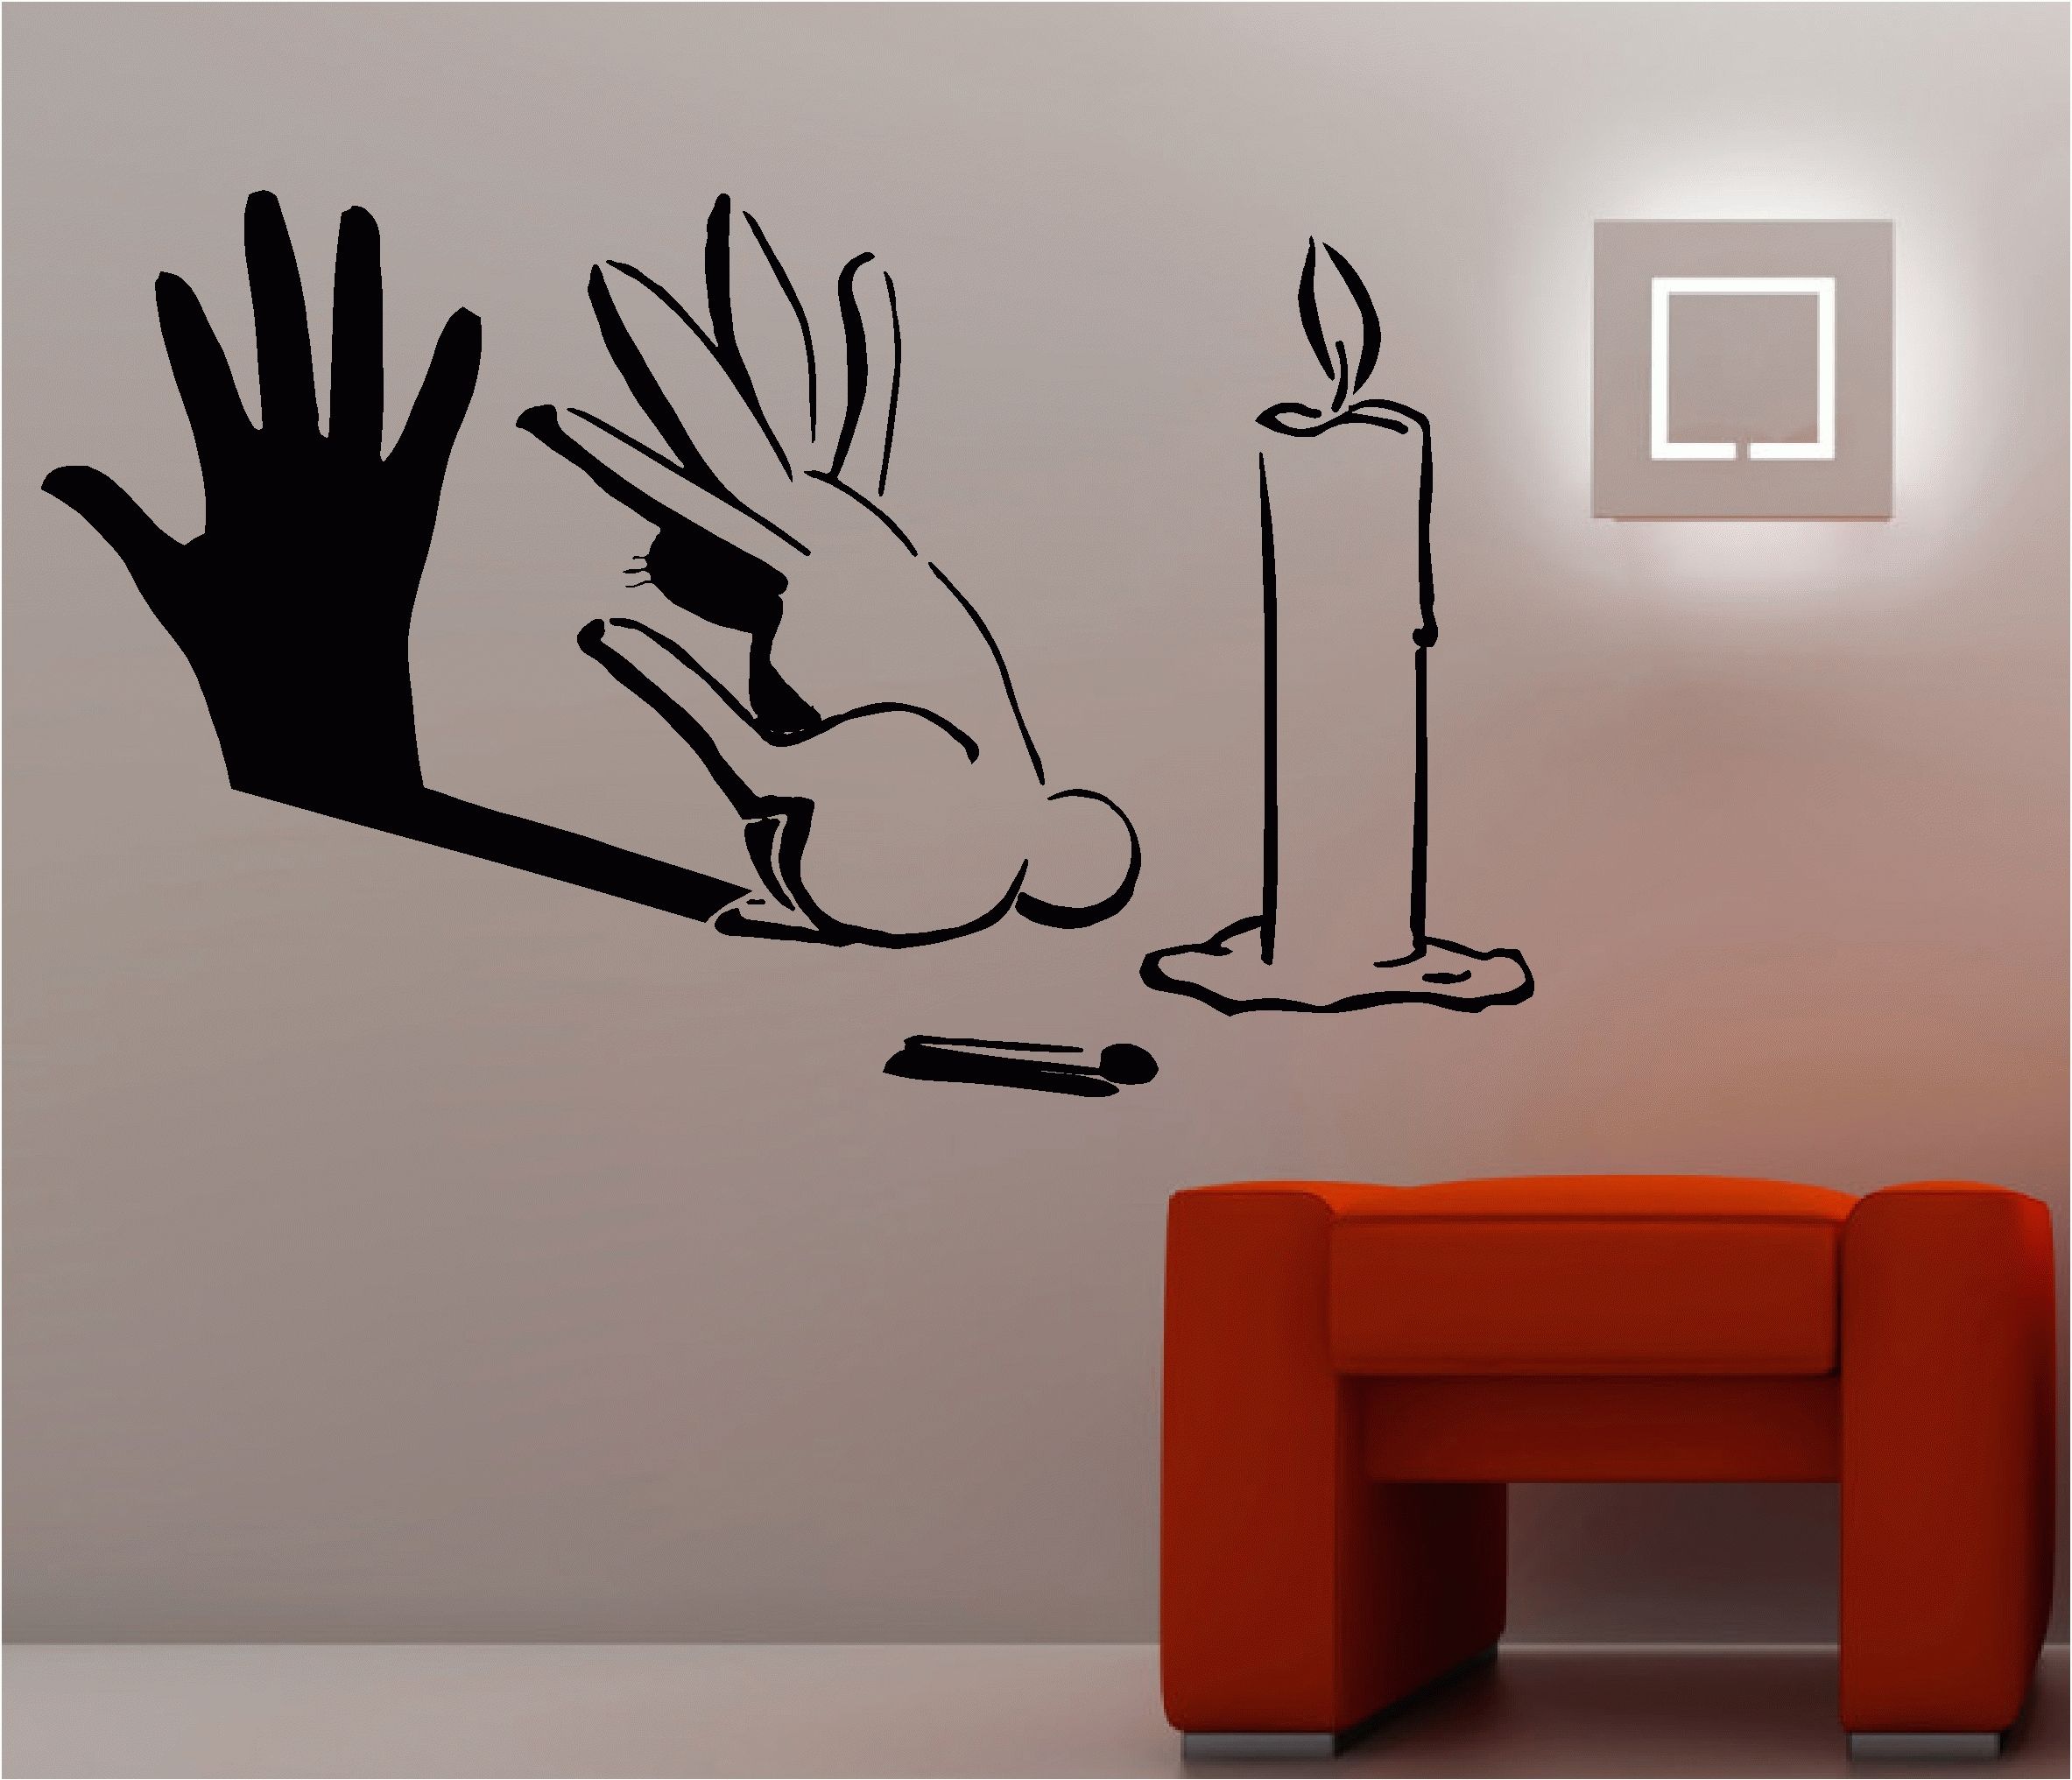 Cool Wall Art Throughout Most Up To Date Rabbit Shadow Graffiti Wall Art Sticker Lounge Bedroom Kitchen (View 5 of 15)